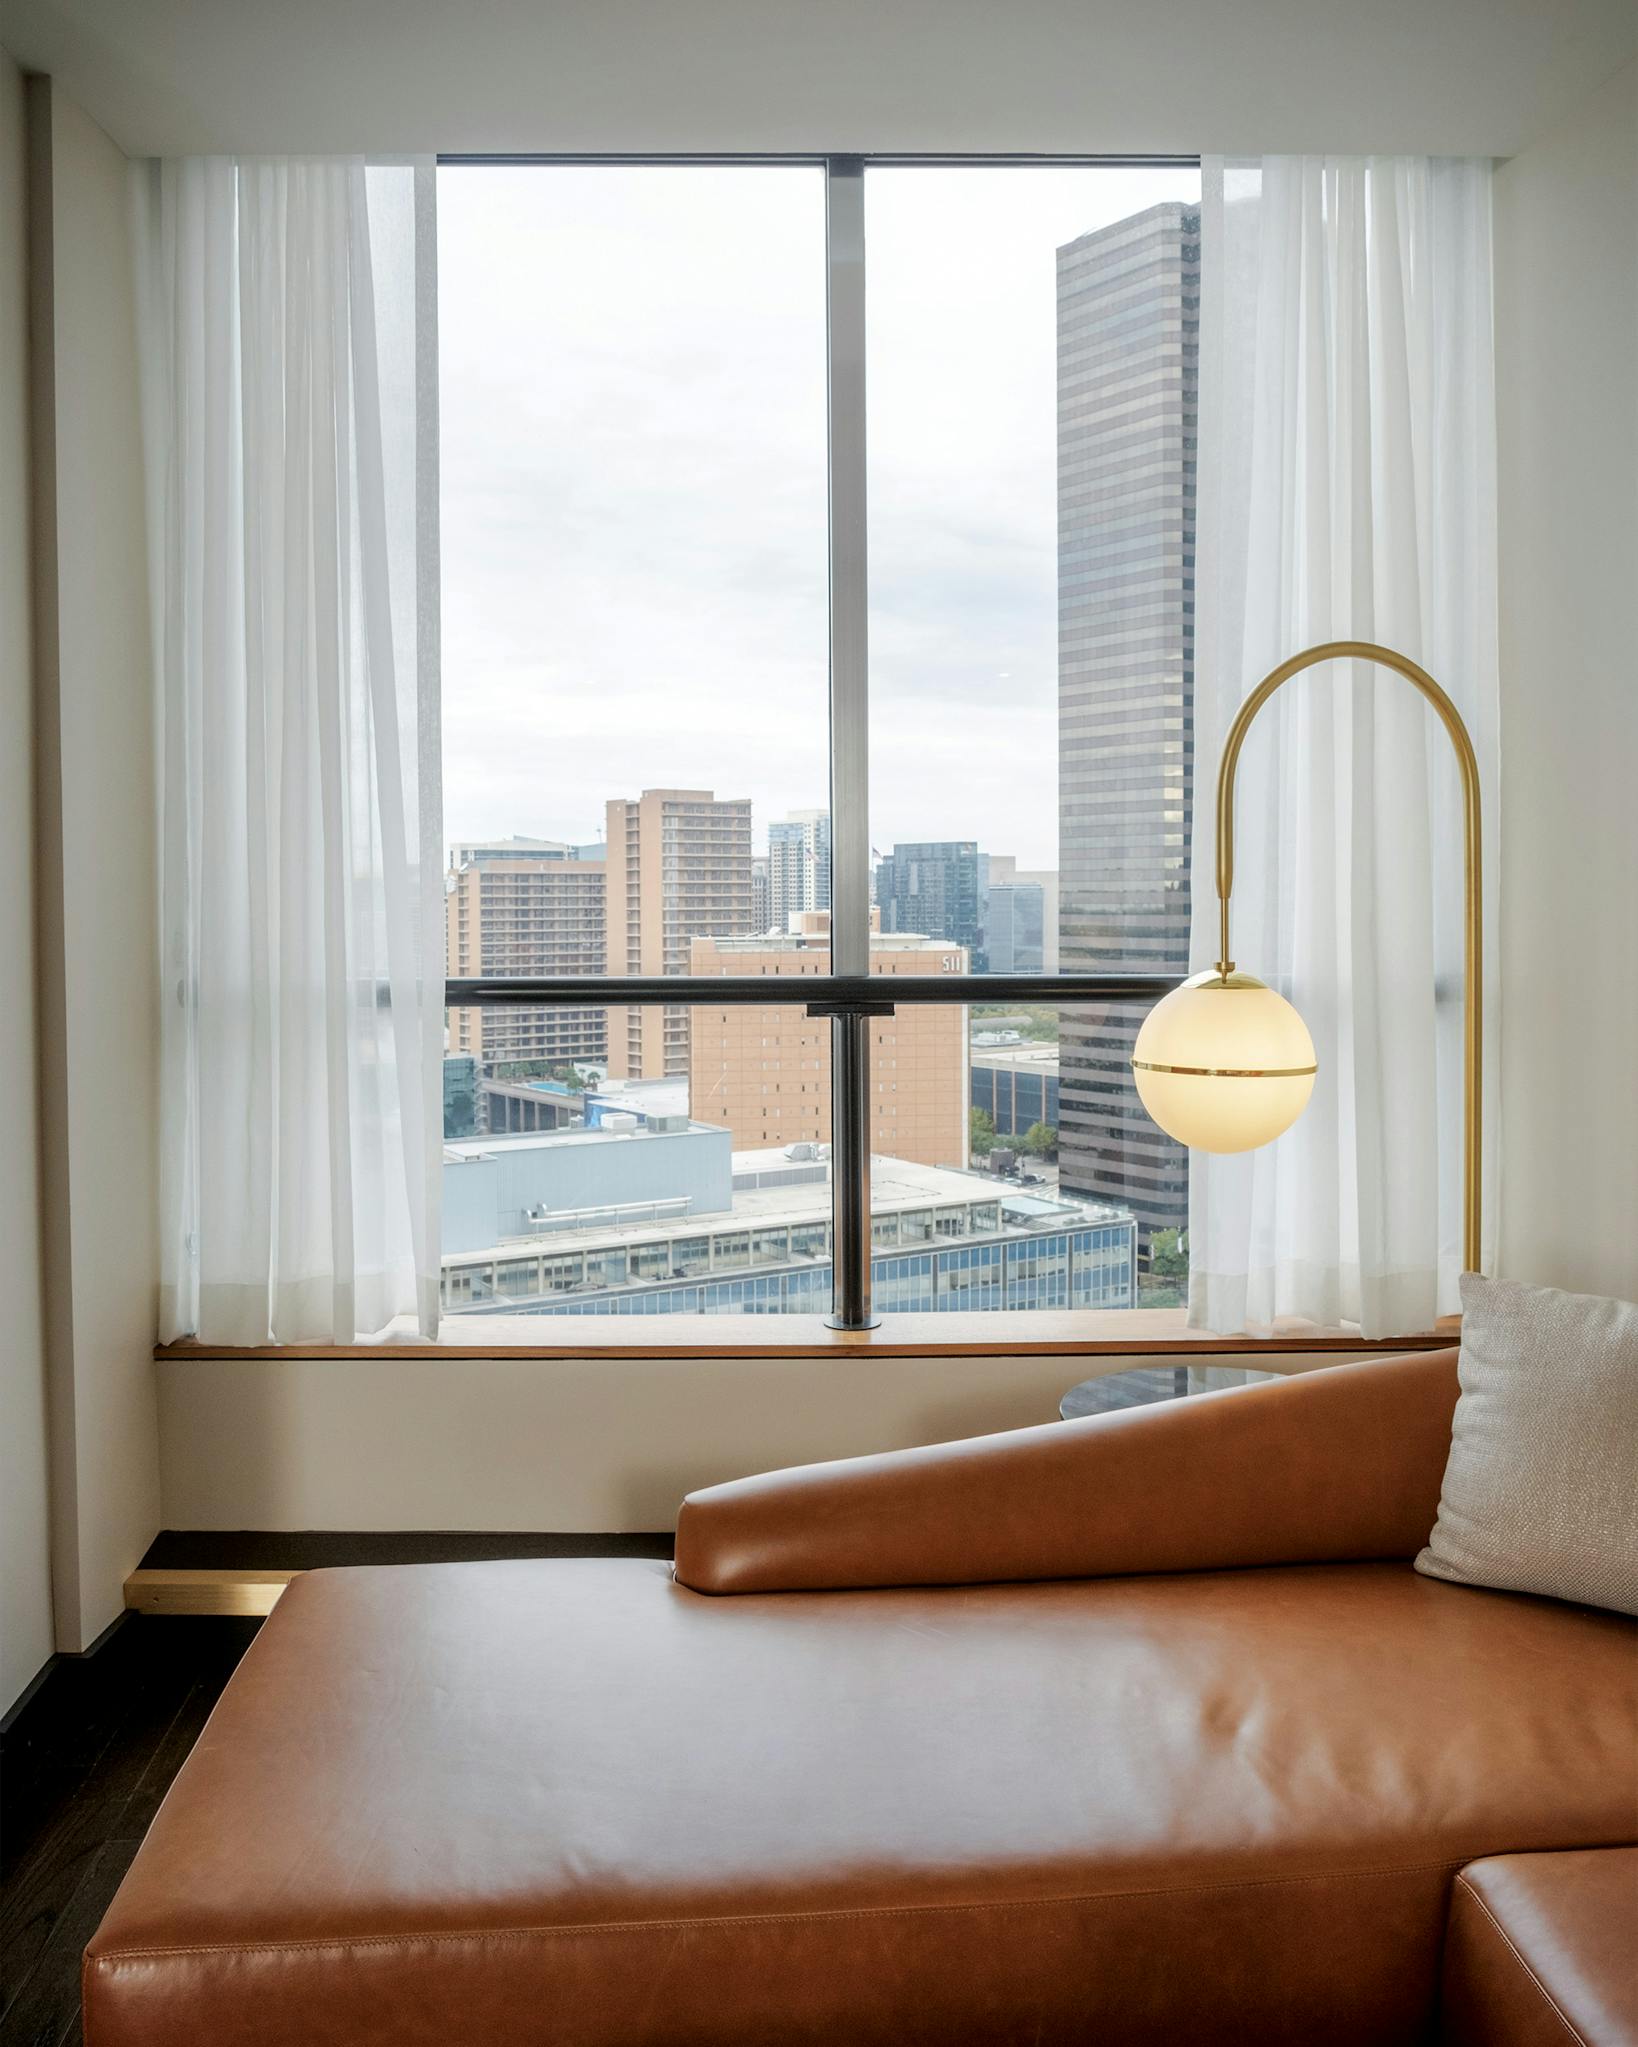 A room with a sitting area and a view of the Dallas skyline.